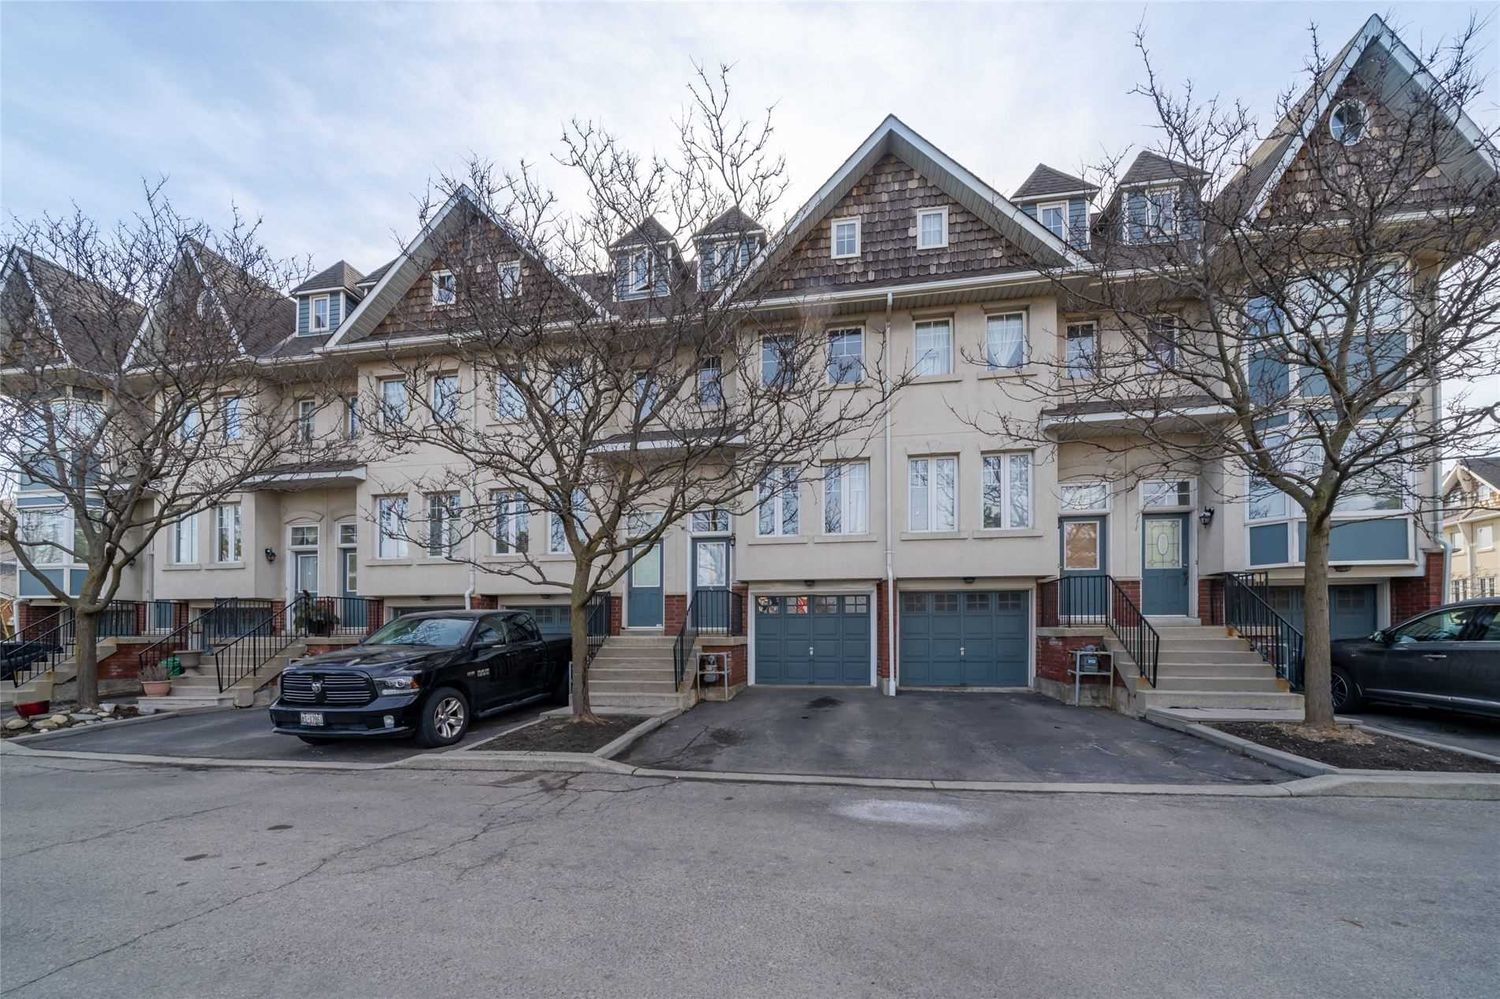 800 Dundas Street W. 800 Dundas Street West Townhomes is located in  Mississauga, Toronto - image #1 of 2